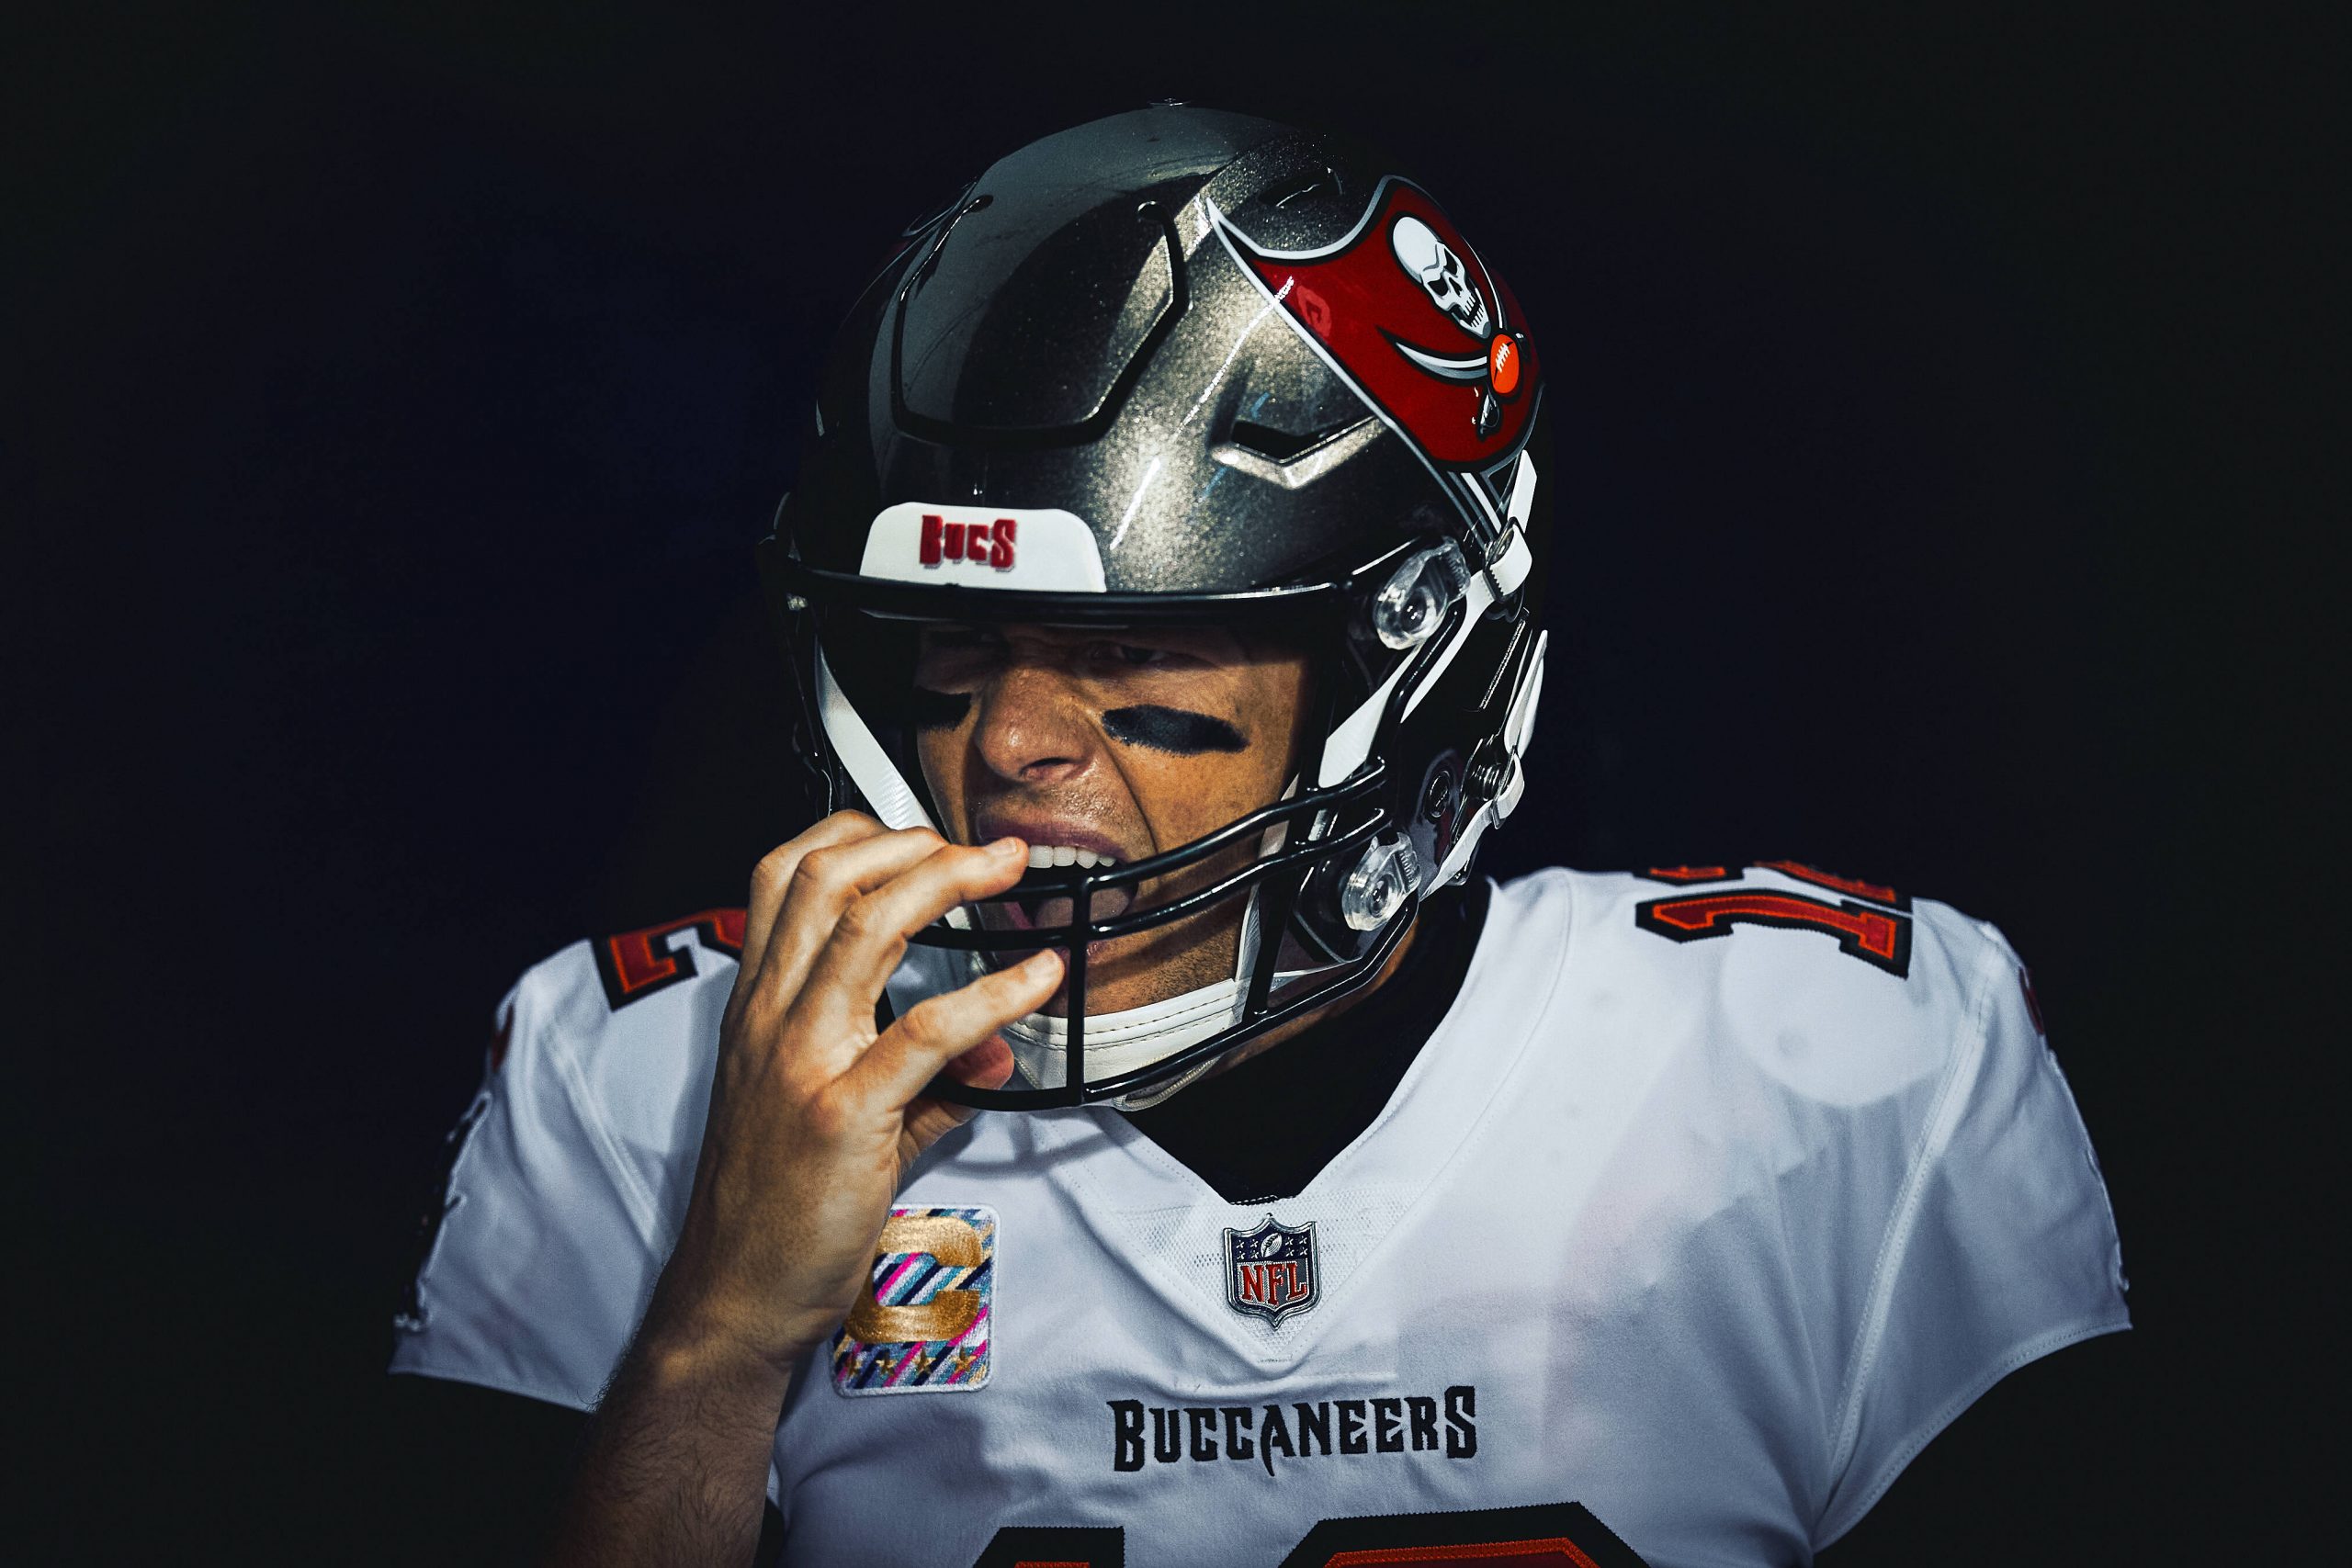 CHICAGO, IL - OCTOBER 08: Tampa Bay Buccaneers Quarterback Tom Brady (12) adjusts his helmet prior to game action for a